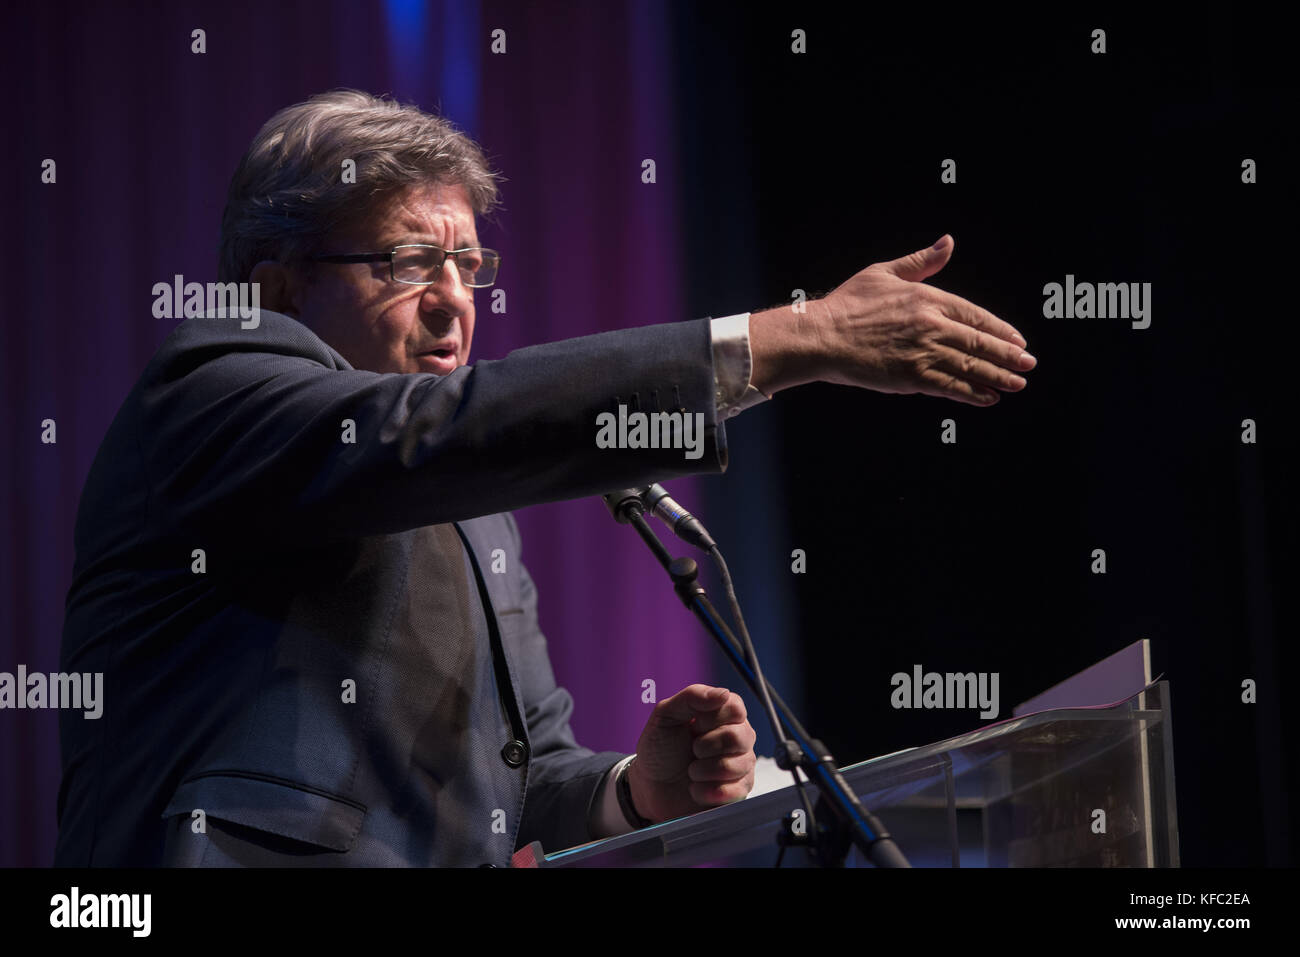 Athens, Greece. 27th Oct, 2017. JEAN-LUC MELENCHON addresses participants during the opening of the conference of Zoe Konstantopoulou's party Plefsi Eleftherias. Plefsi Eleftherias, meaning Sail of Freedom, was formed by governing party Syriza's dissident and former president of the Greek parliament, Zoe Konstantopoulou. Credit: Nikolas Georgiou/ZUMA Wire/Alamy Live News Stock Photo